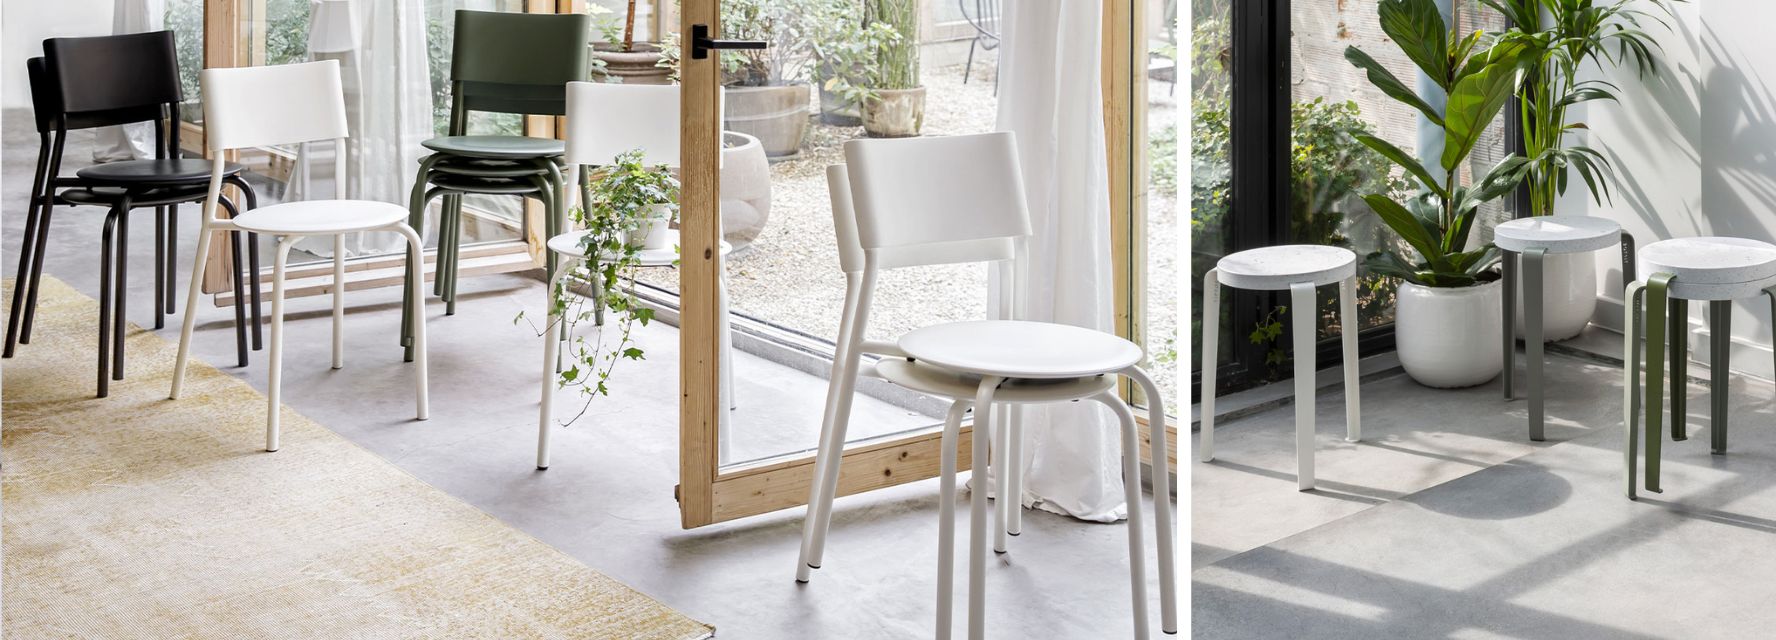 Chairs and stools - TIPTOE